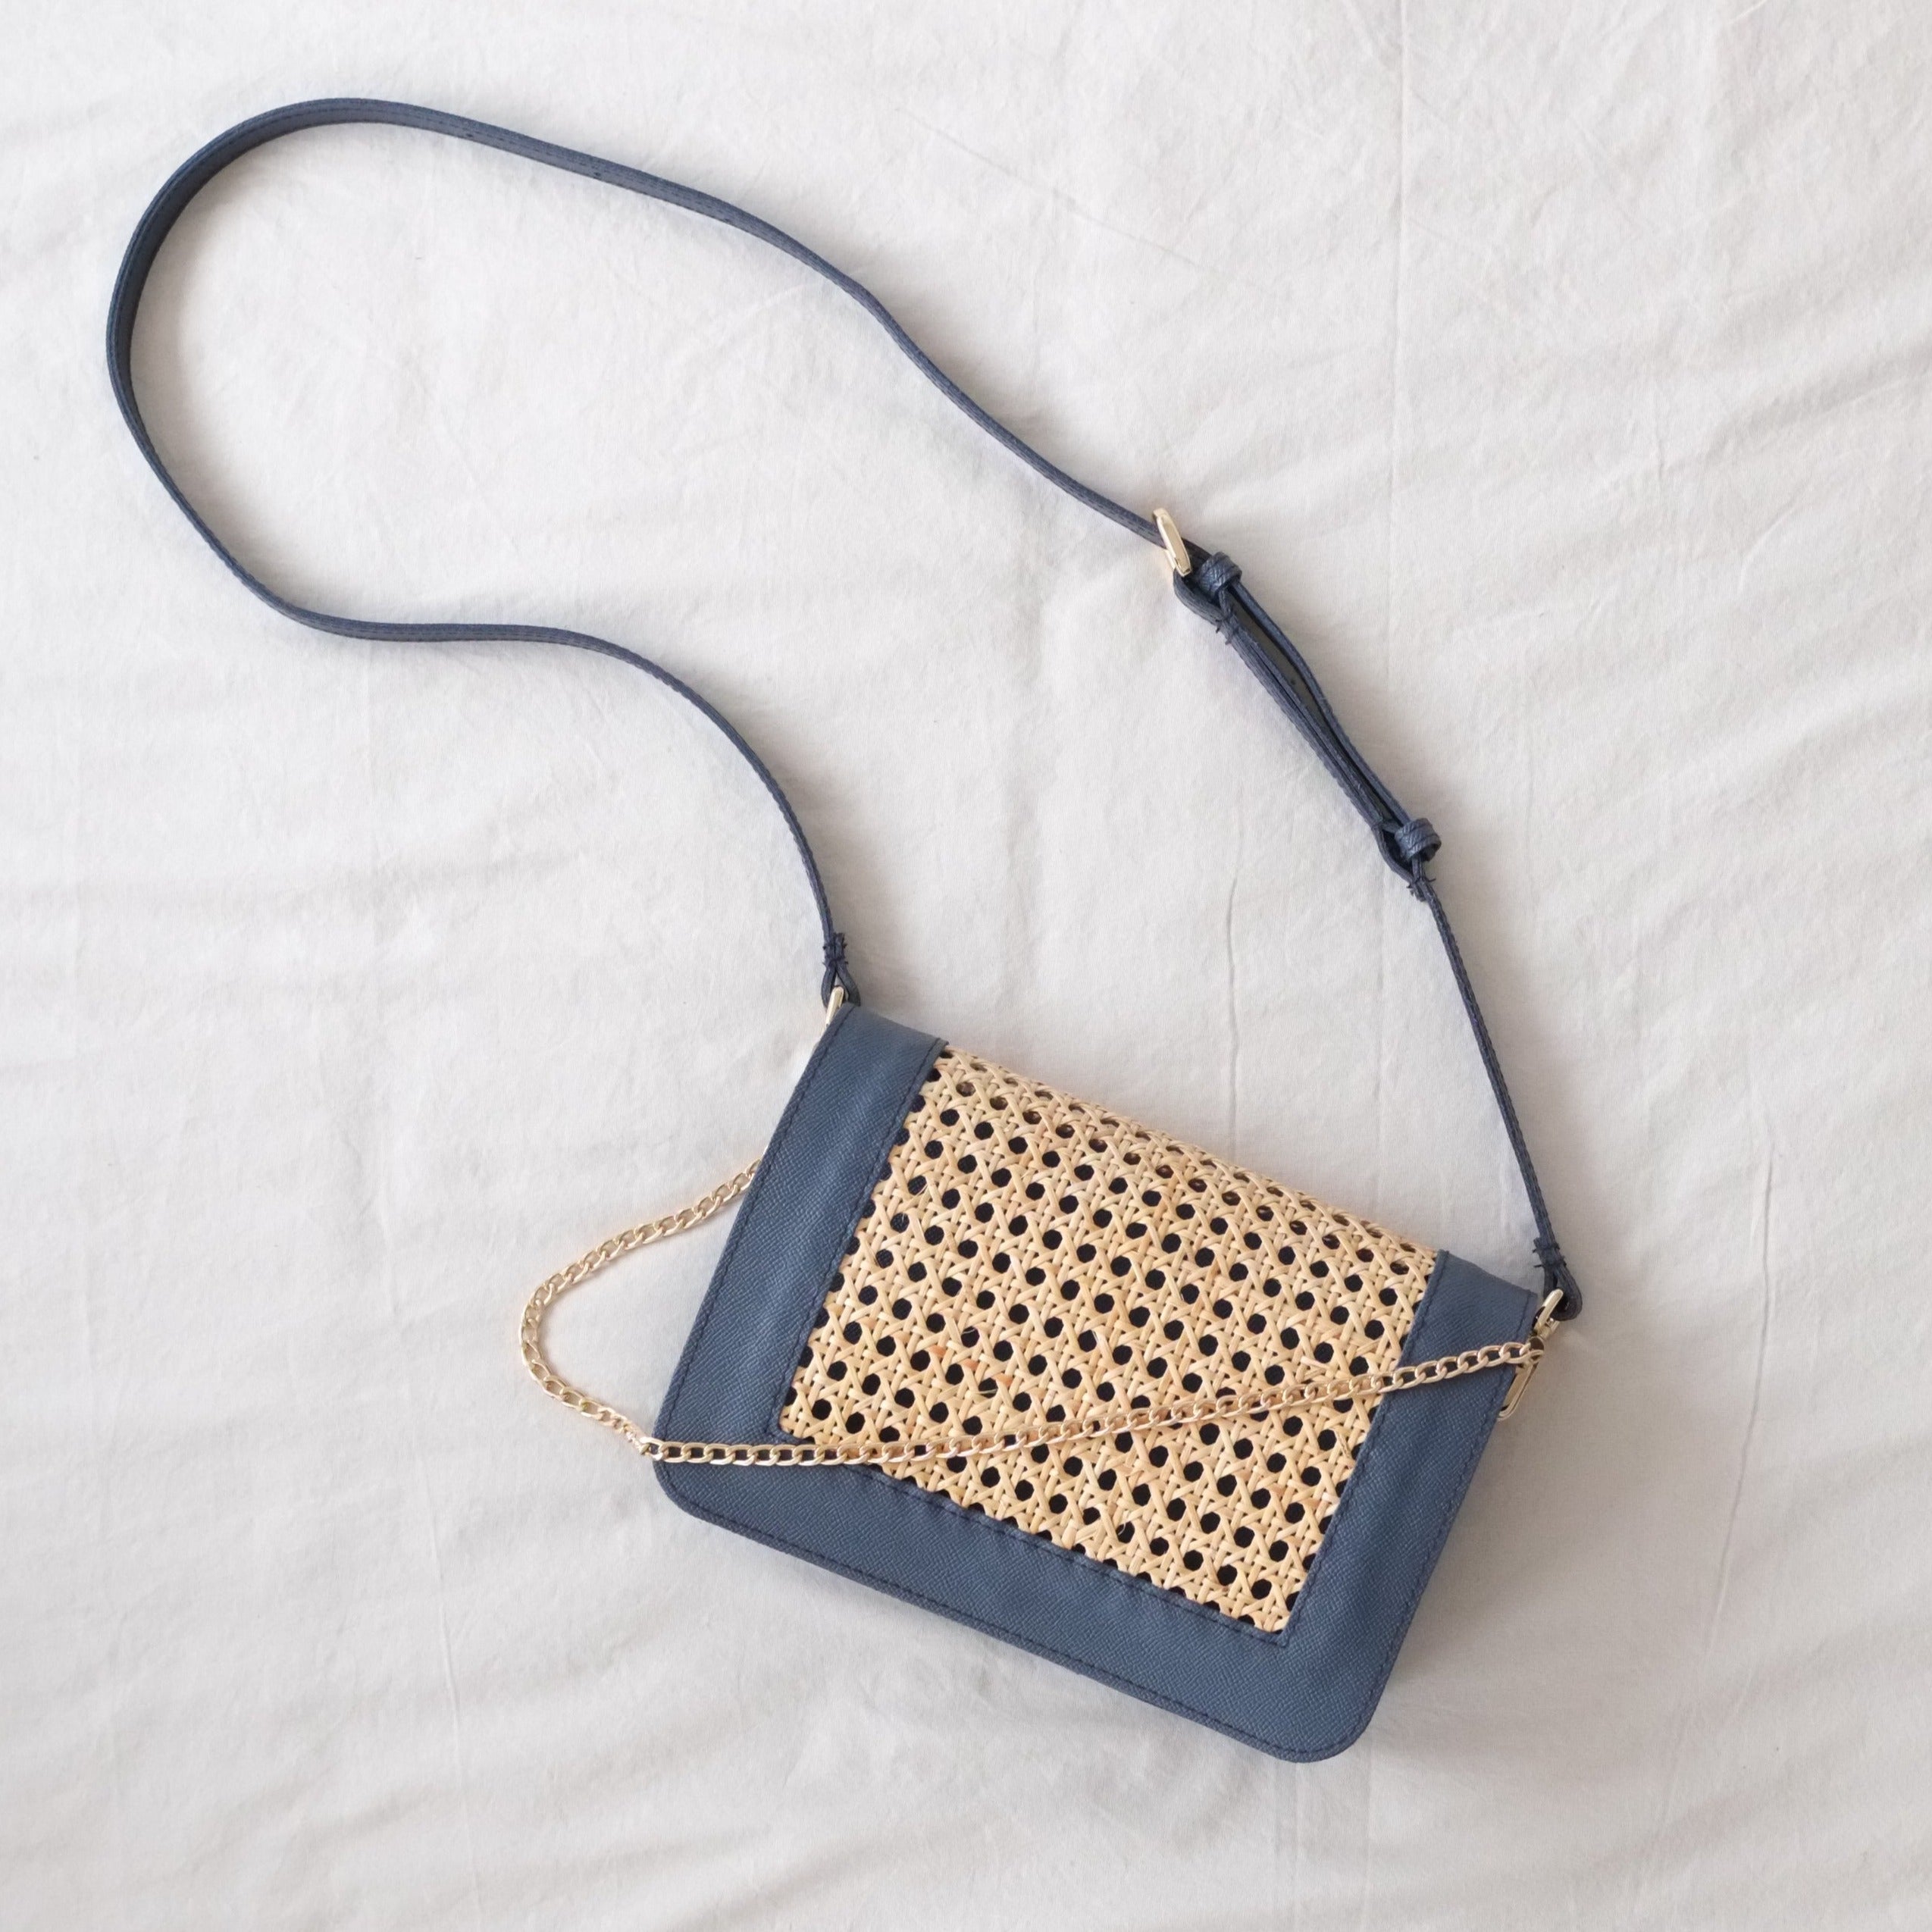 Small leather bag in NAVY BLUE. Crossbody or shoulder bag in GENUINE l –  Handmade suede bags by Good Times Barcelona